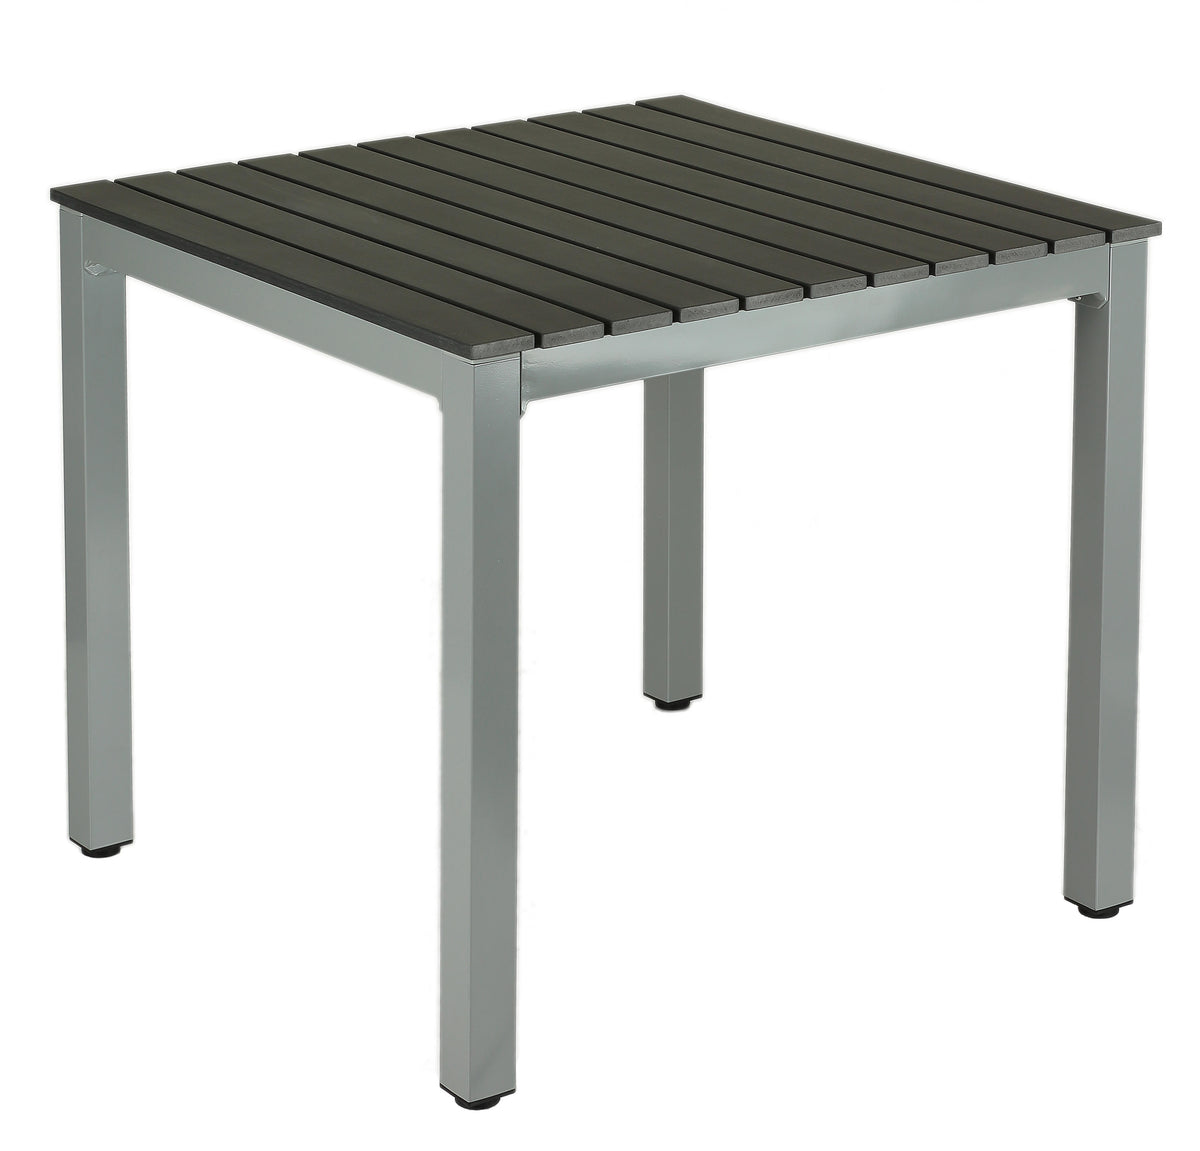 Jaxon Aluminum Outdoor Table in Poly Resin, Silver/Slate Grey 31x31